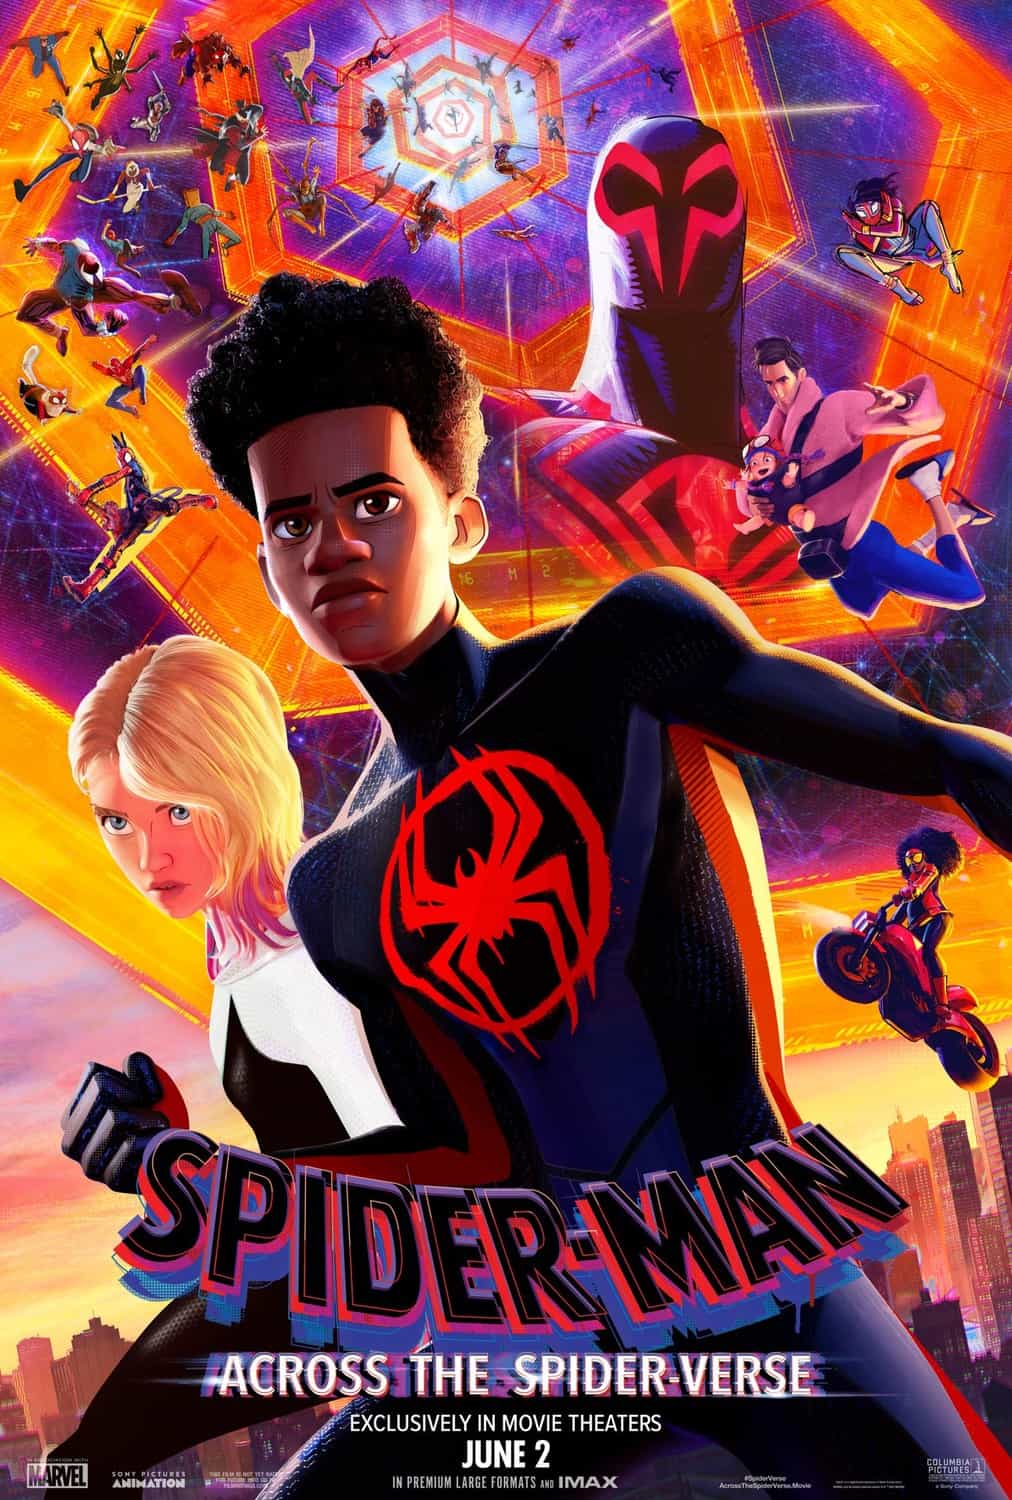 New poster released for Spider-Man: Across the Spider-Verse starring Shameik Moore - movie UK release date 2nd June 2023 #spidermanacrossthespiderverse